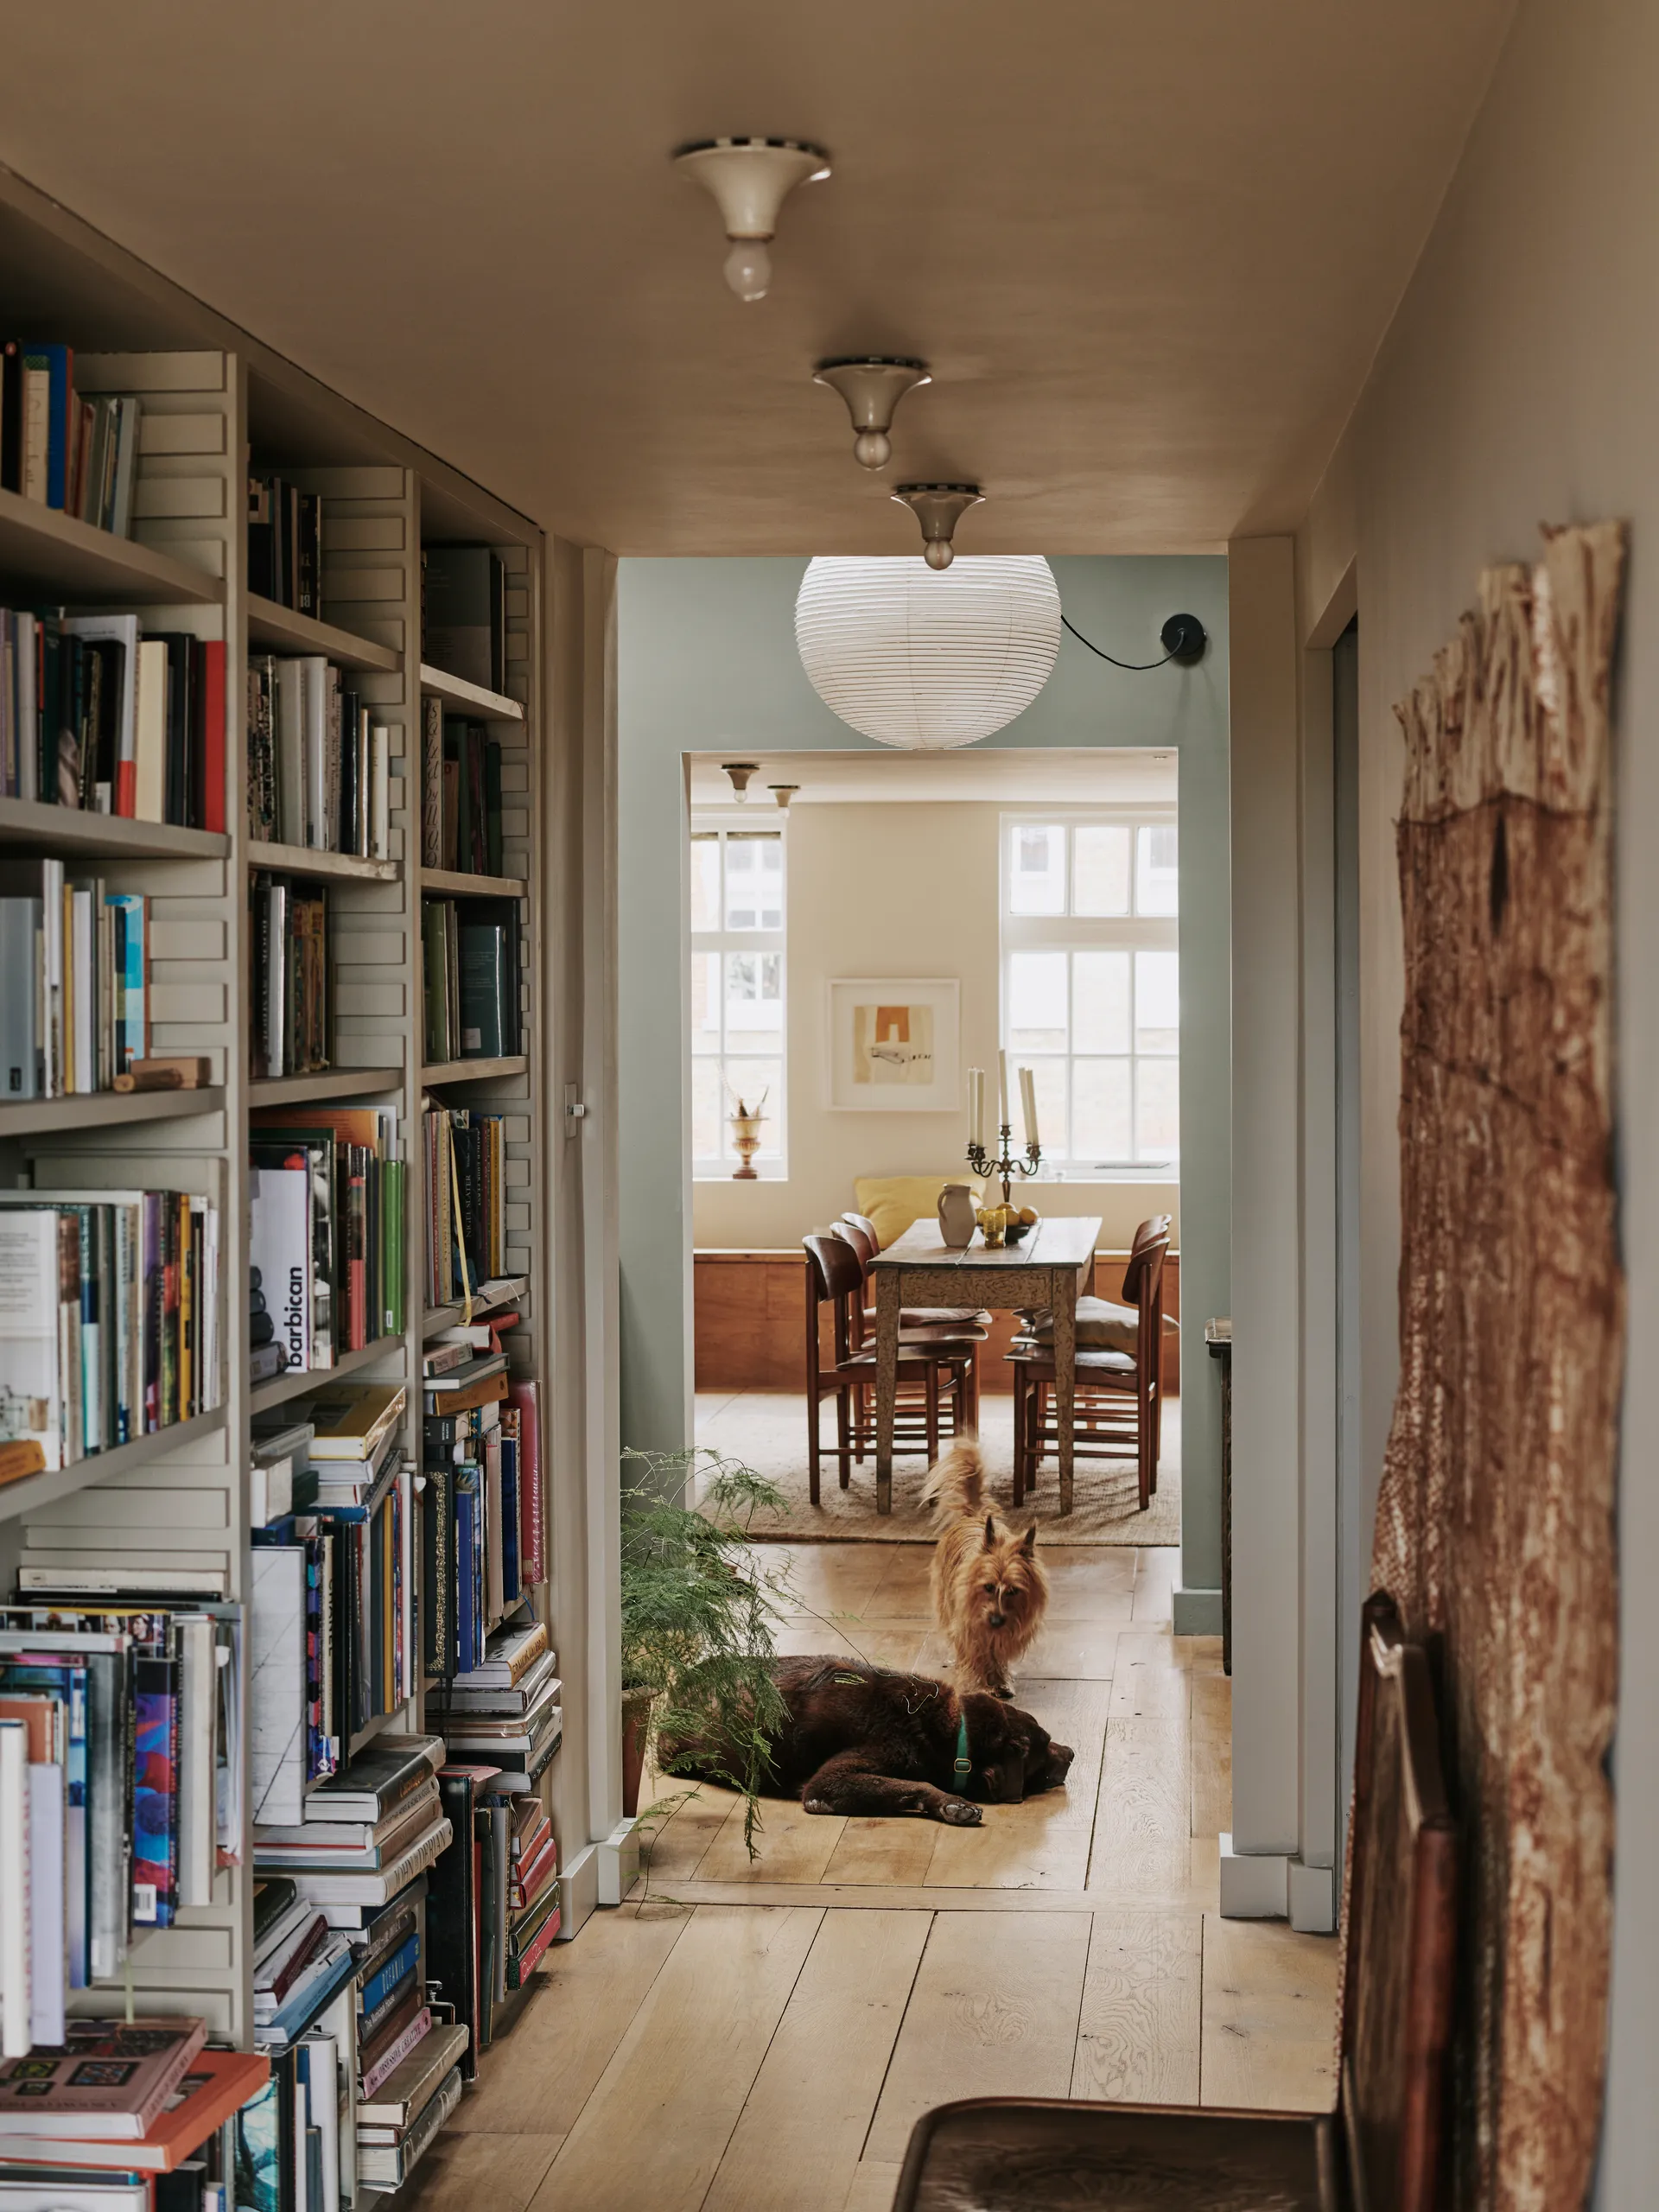 From Minimalism to Maximalism: Finding Your Style in Creative Bookshelf Ideas